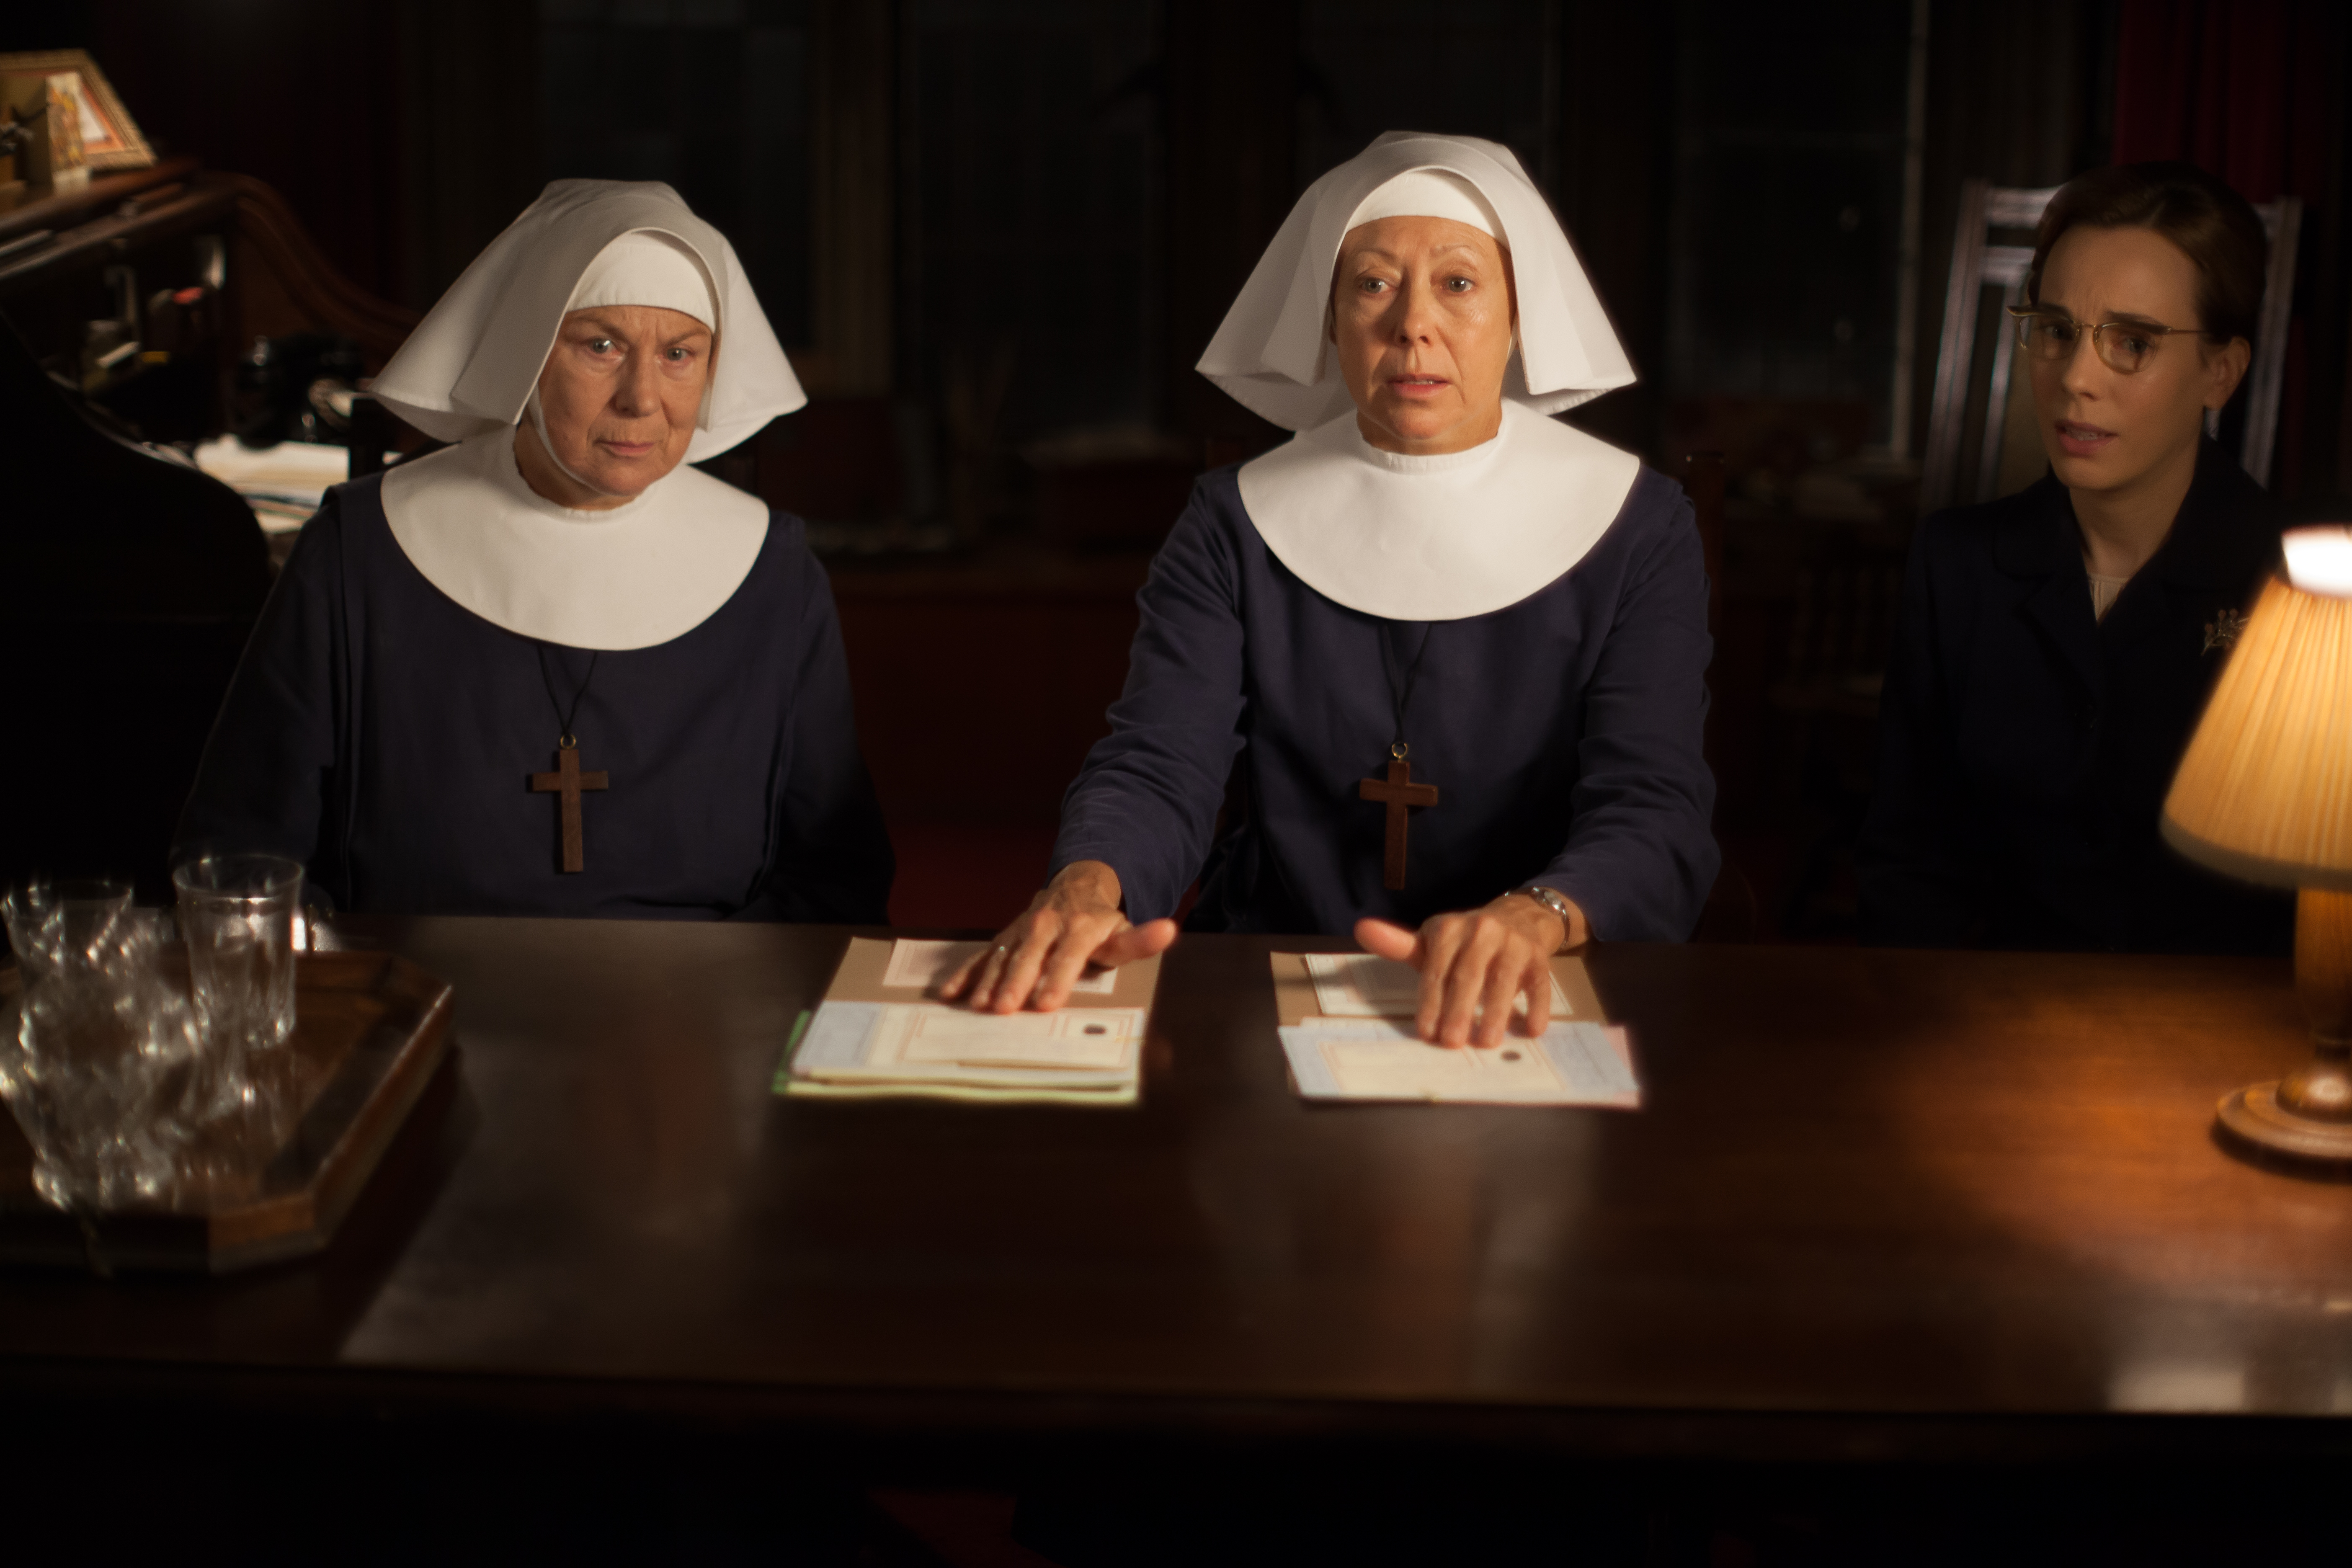 Sister Evangelina, Sister Julienne and Shelagh. (Photo: Courtesy of Laurence Cendrowicz / © Neal Street Productions)